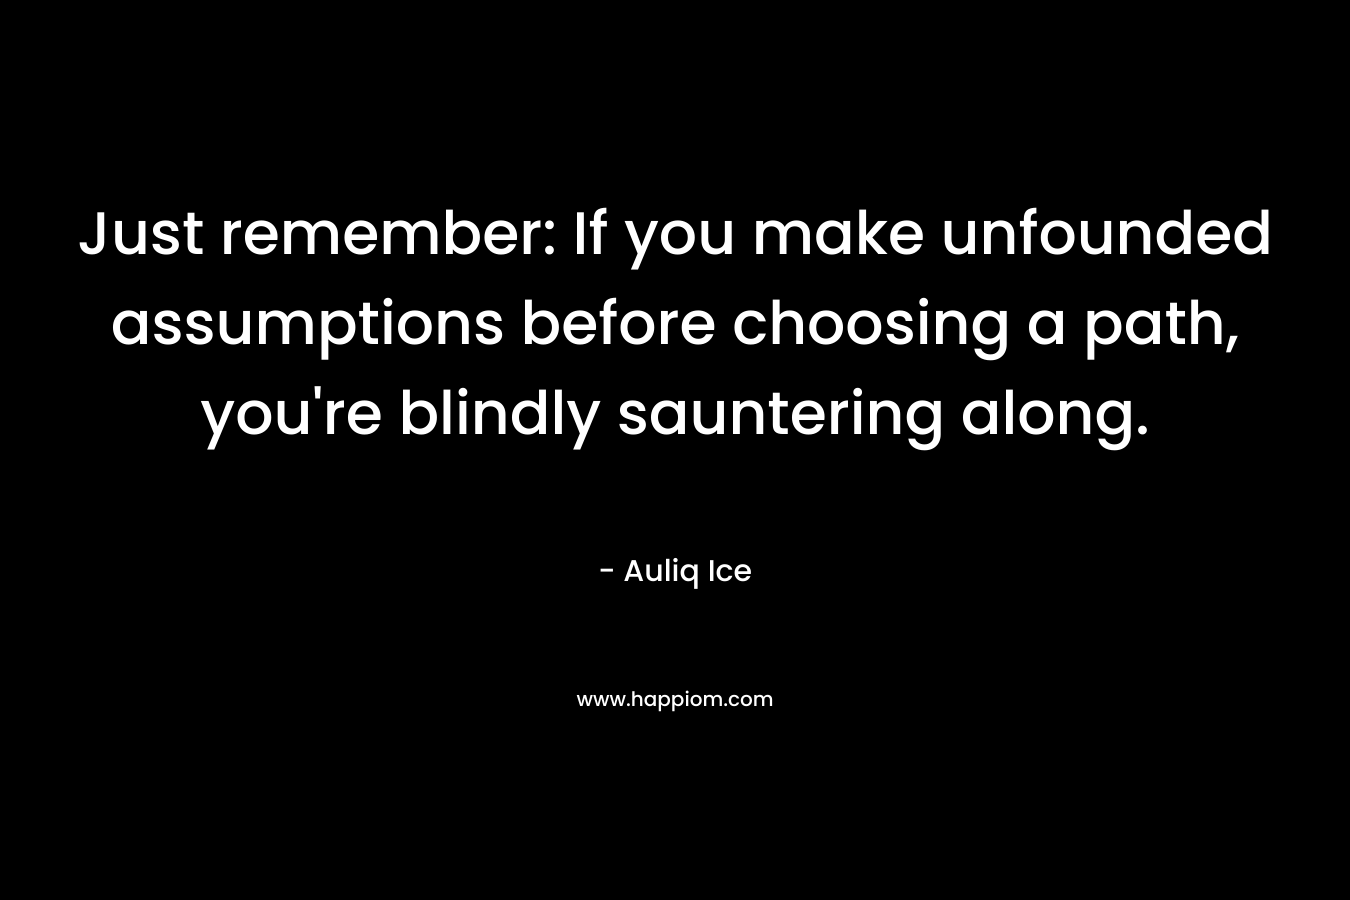 Just remember: If you make unfounded assumptions before choosing a path, you're blindly sauntering along.